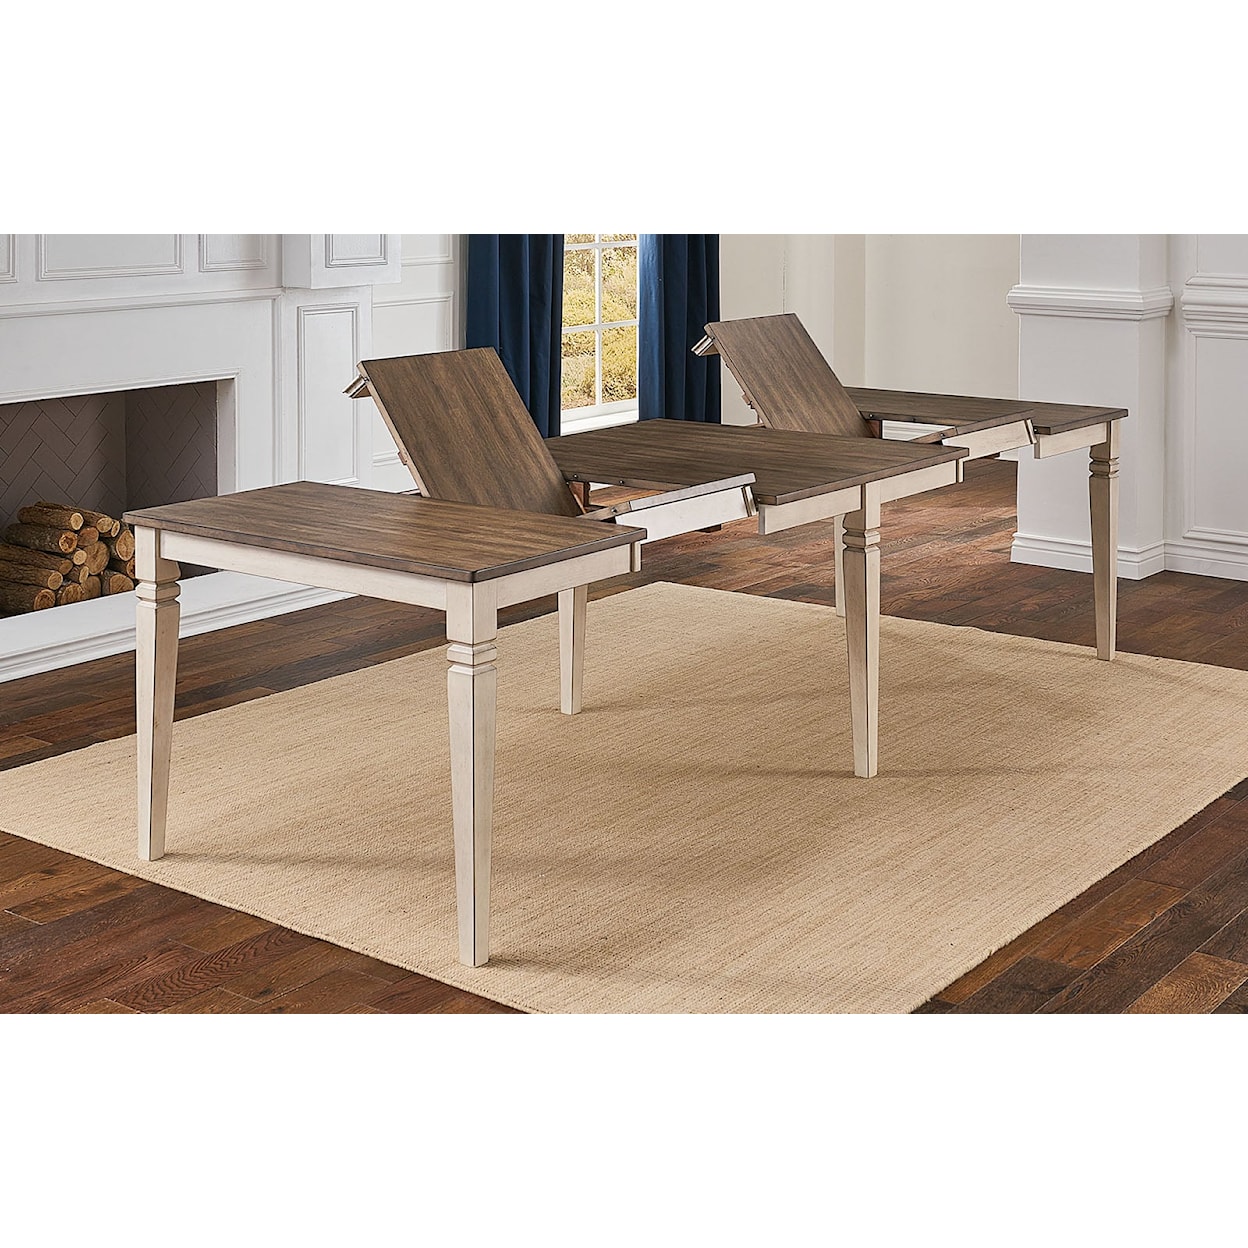 AAmerica Beacon Dining Table